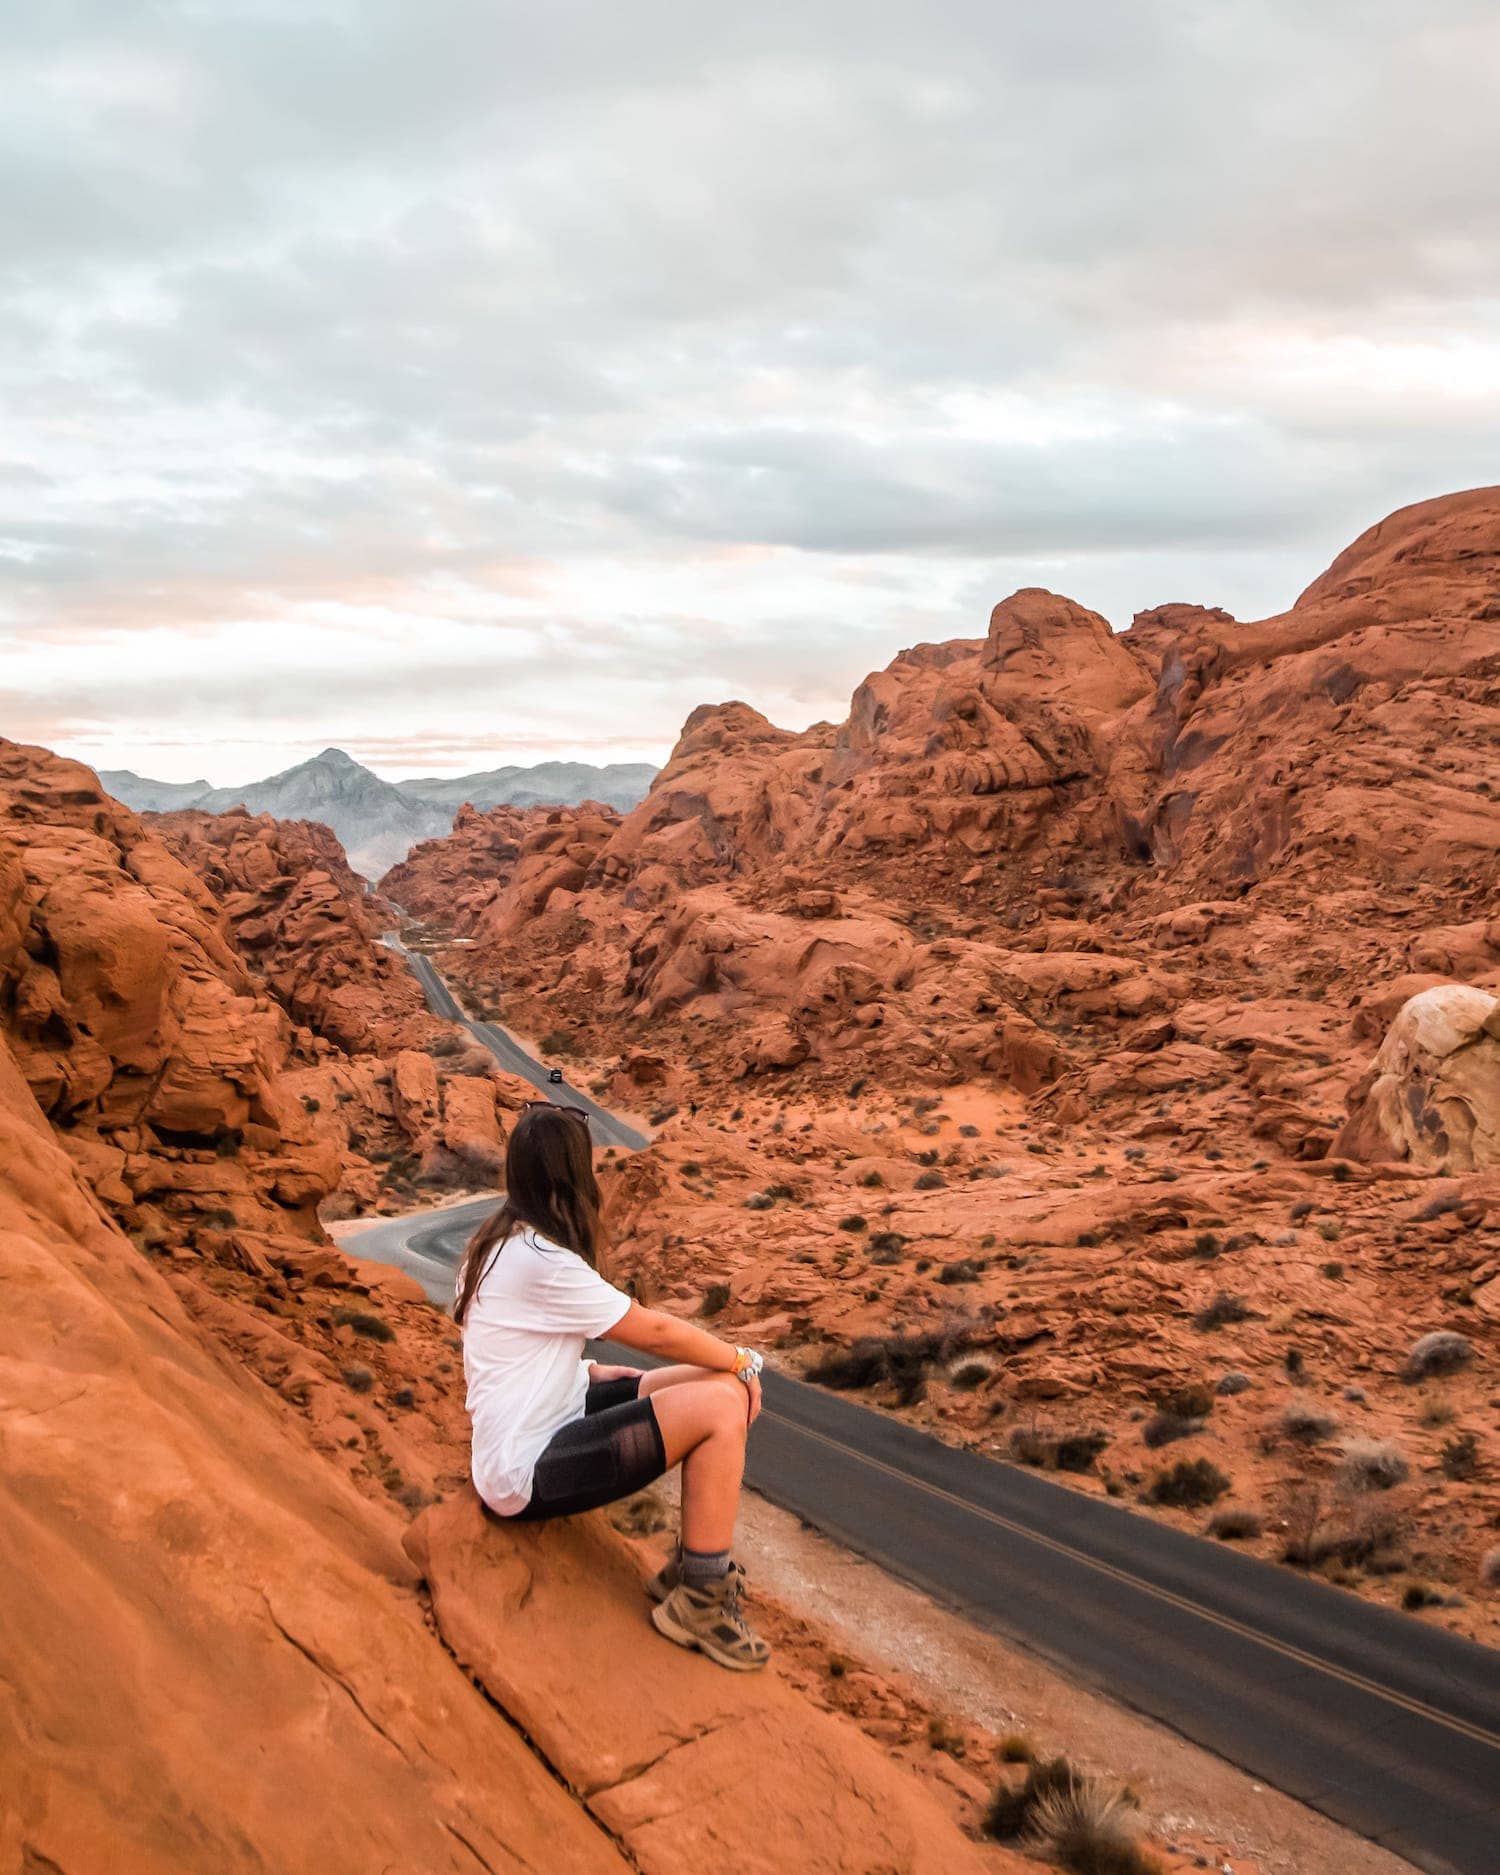 Me sitting on mountainside looking over the Valley of Fire